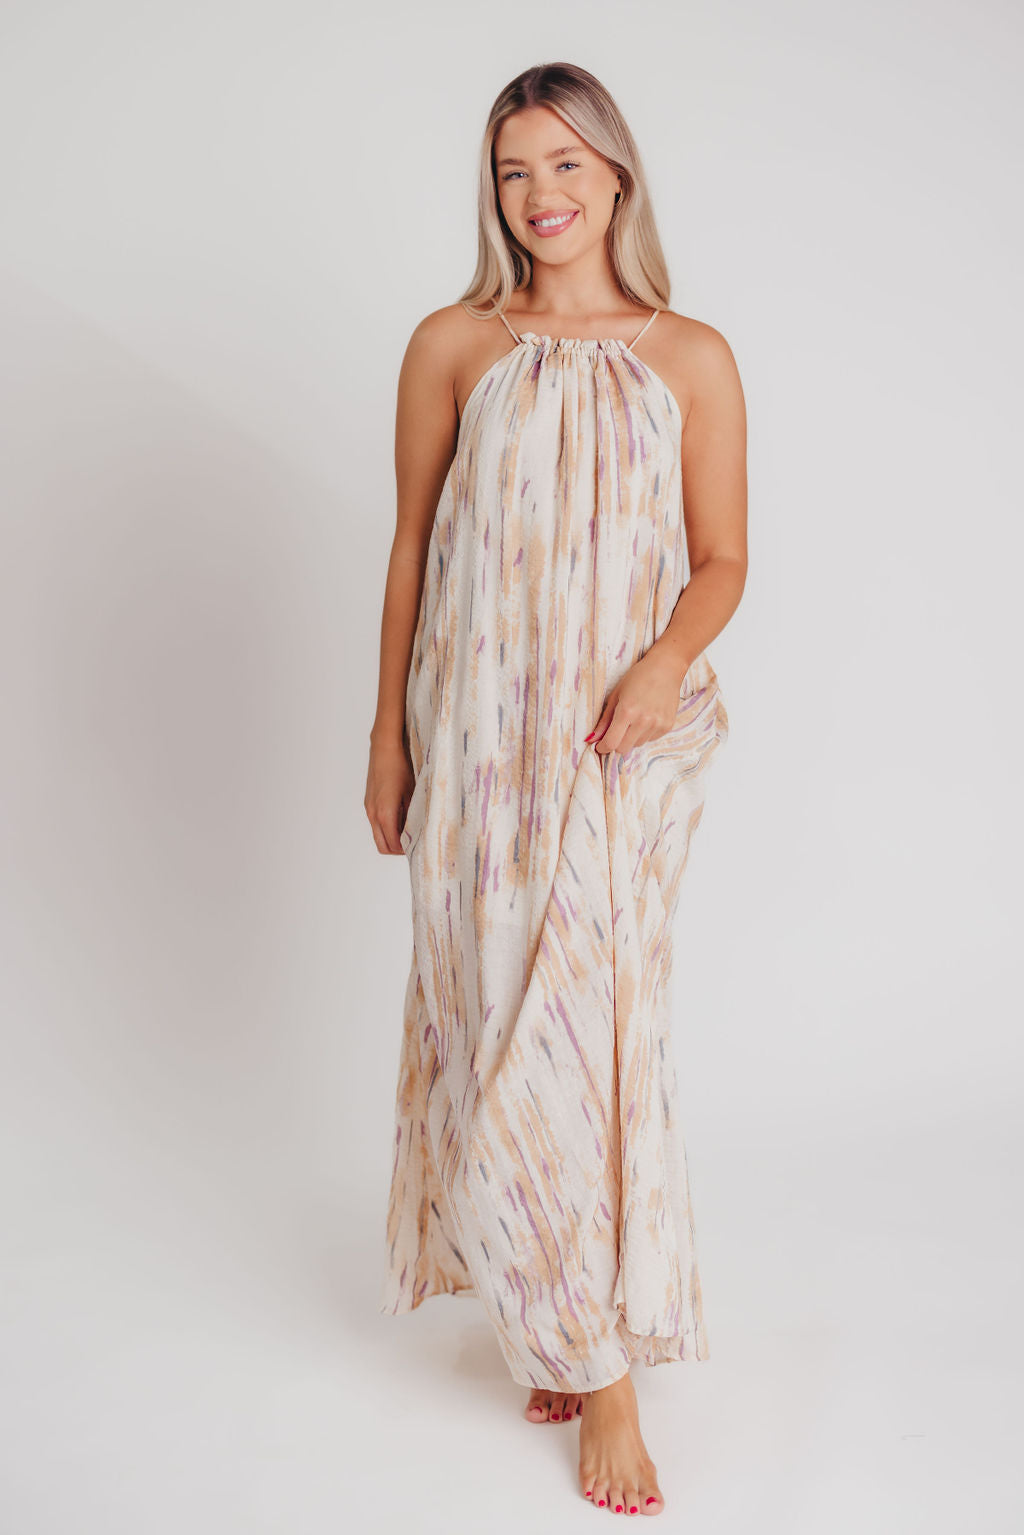 Nicola High Neck Lace-Up Back Maxi Dress in Blush/Natural